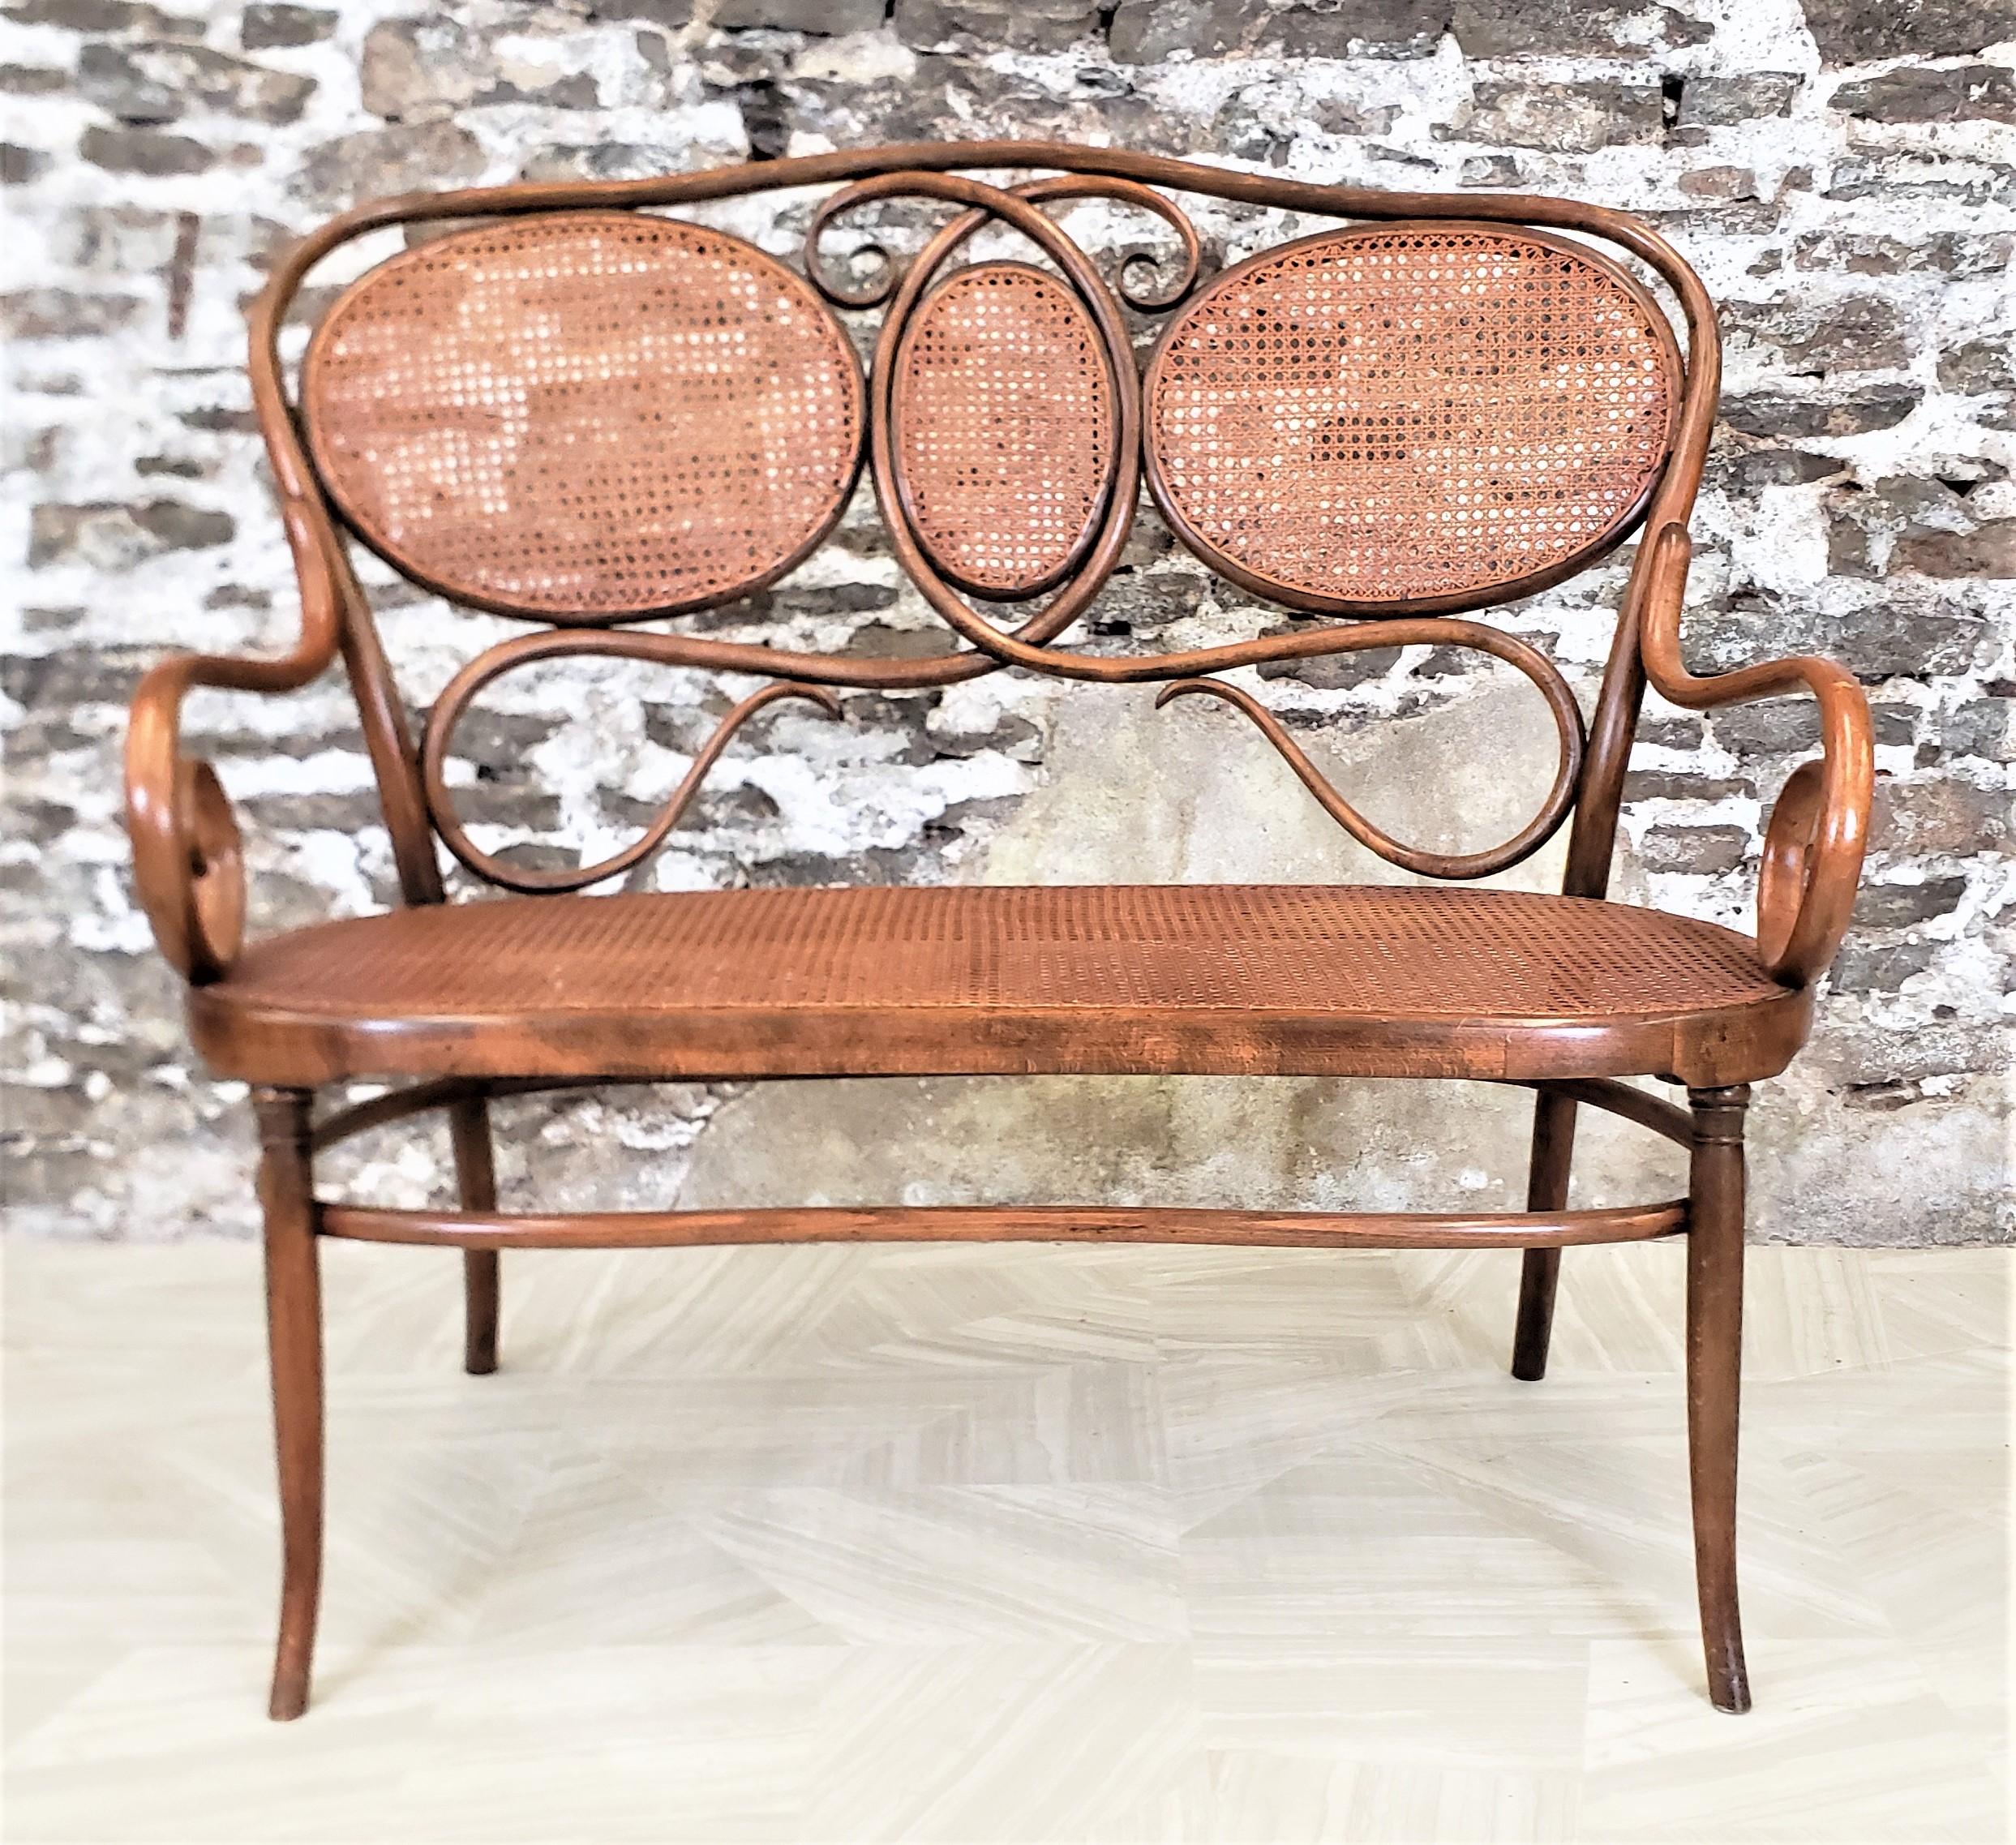 Vienna Secession Antique G. Thonet Attributed Viennese Secessionist Bentwood Loveseat or Settee